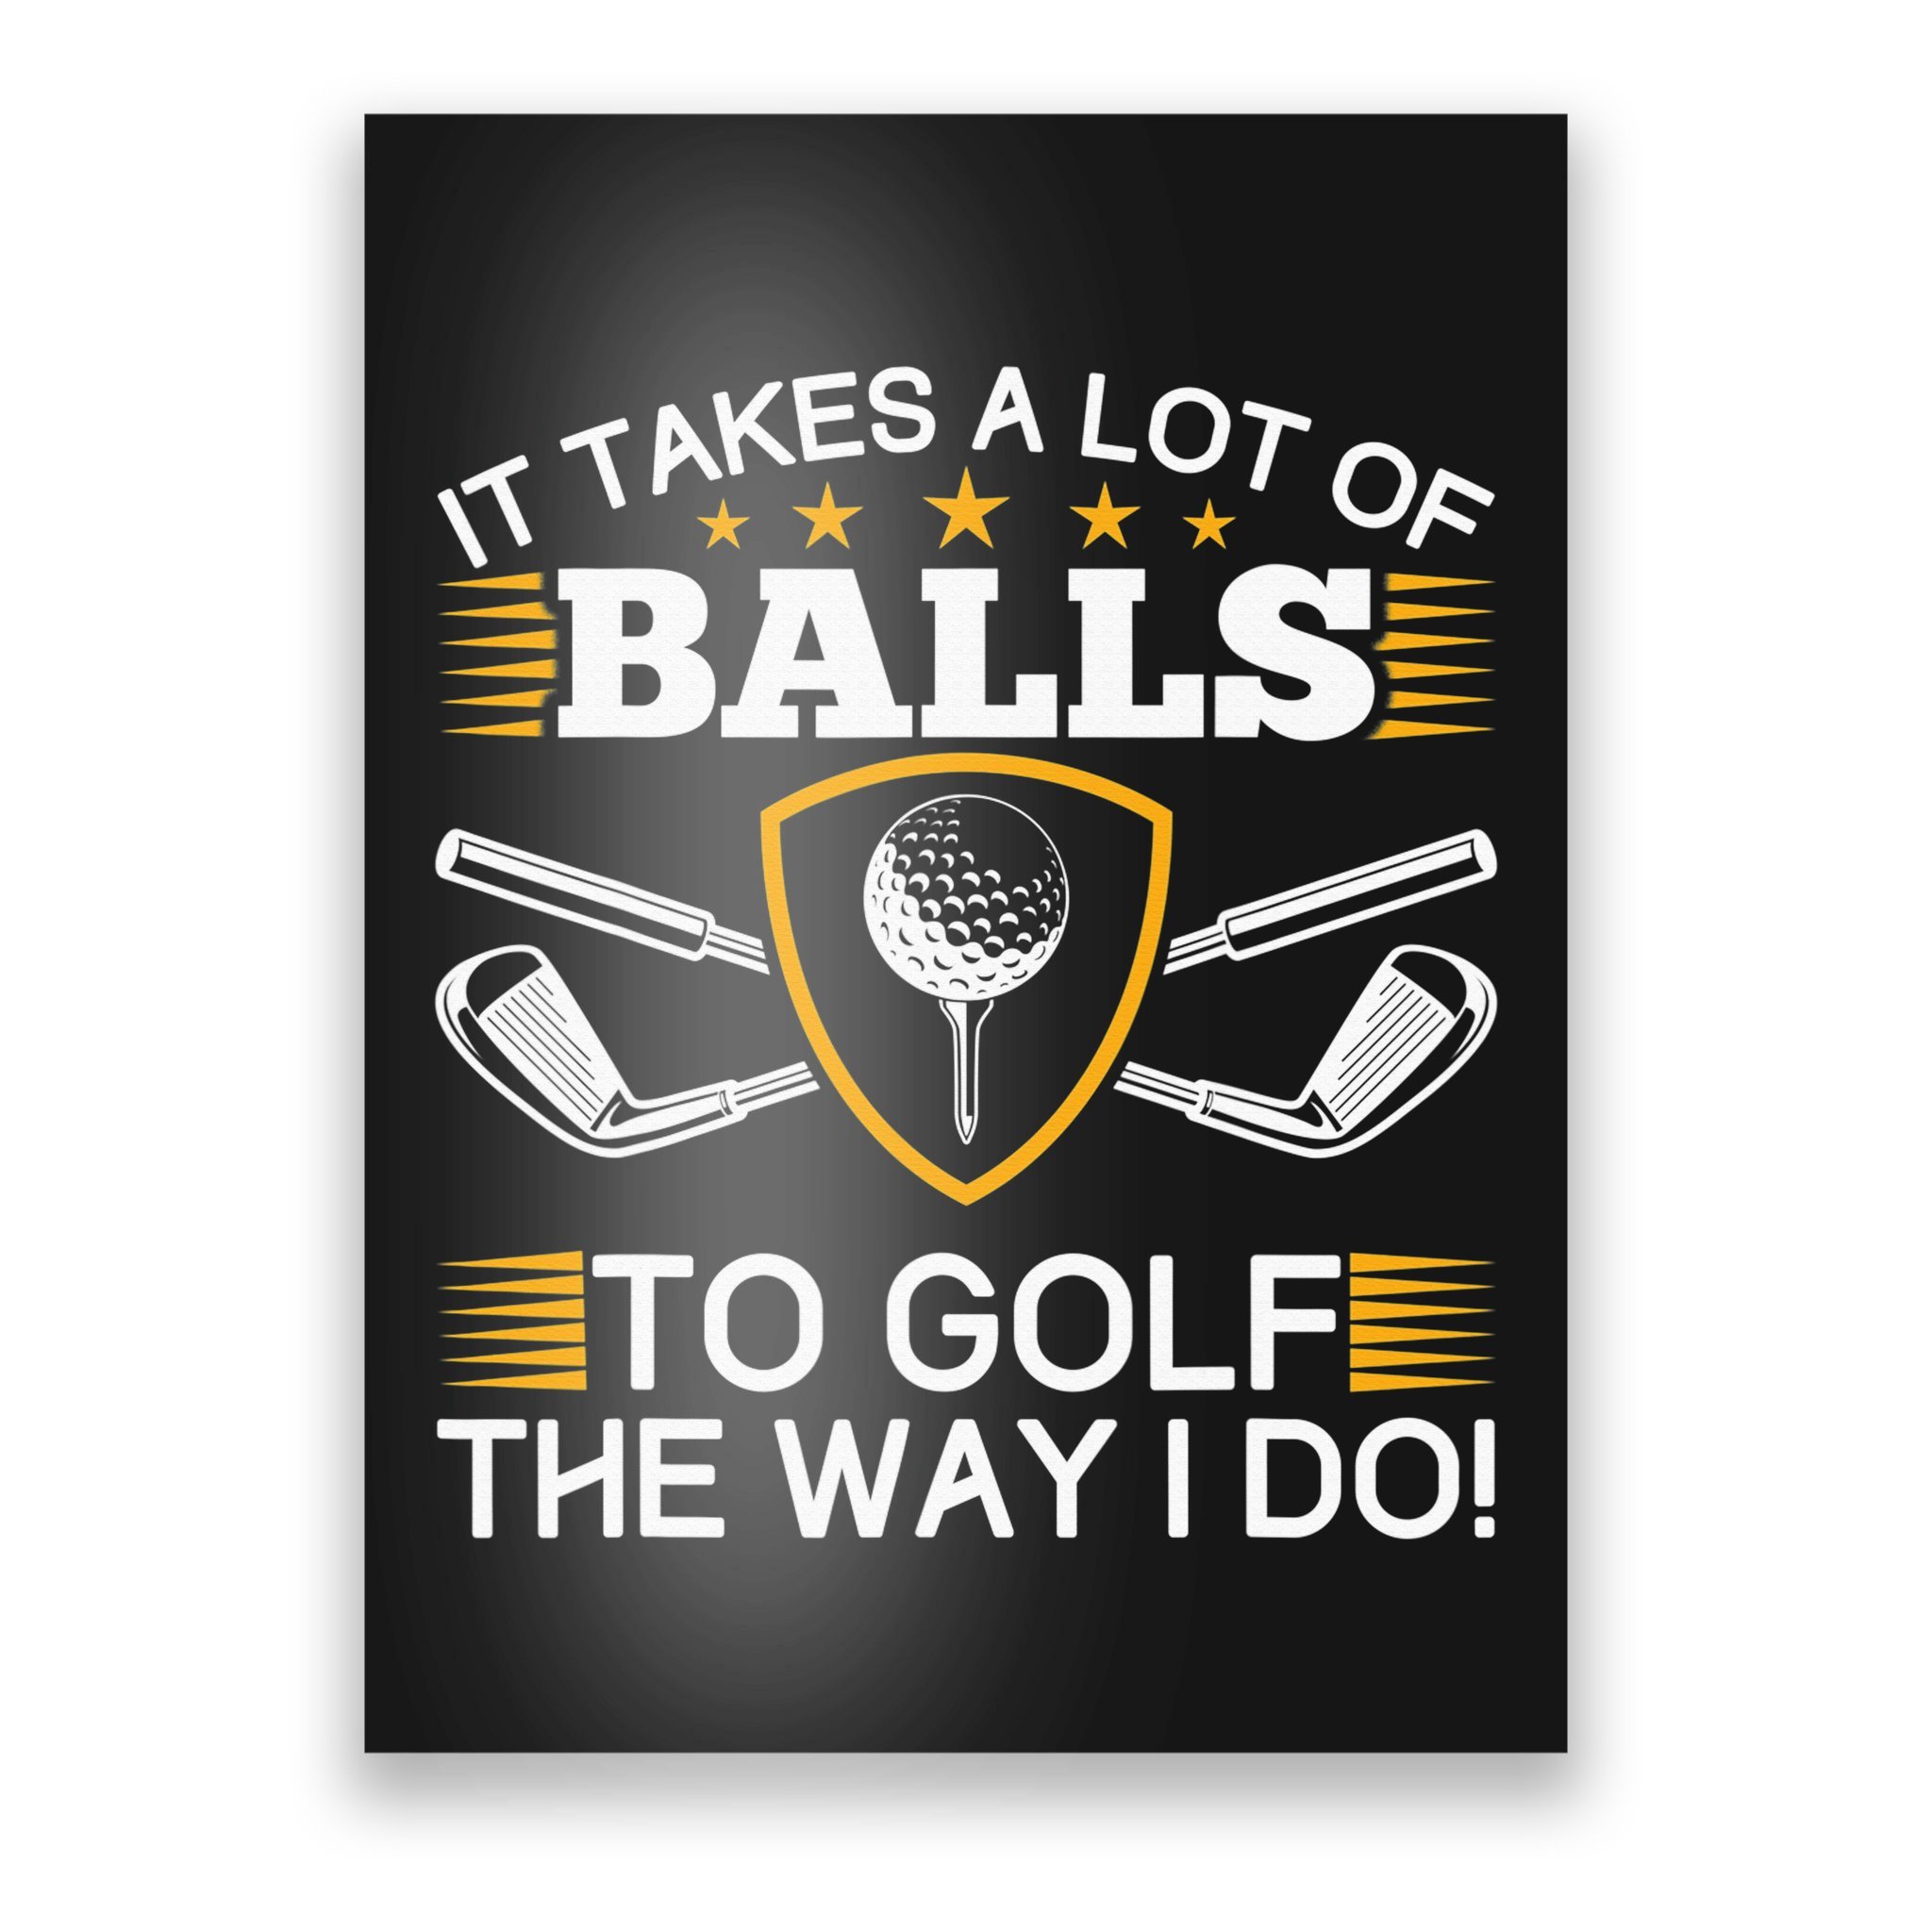 https://images3.teeshirtpalace.com/images/productImages/ggi5892527-golfers-gifts-it-takes-a-lot-of-balls-to-golf-like-i-do--black-post-garment.jpg